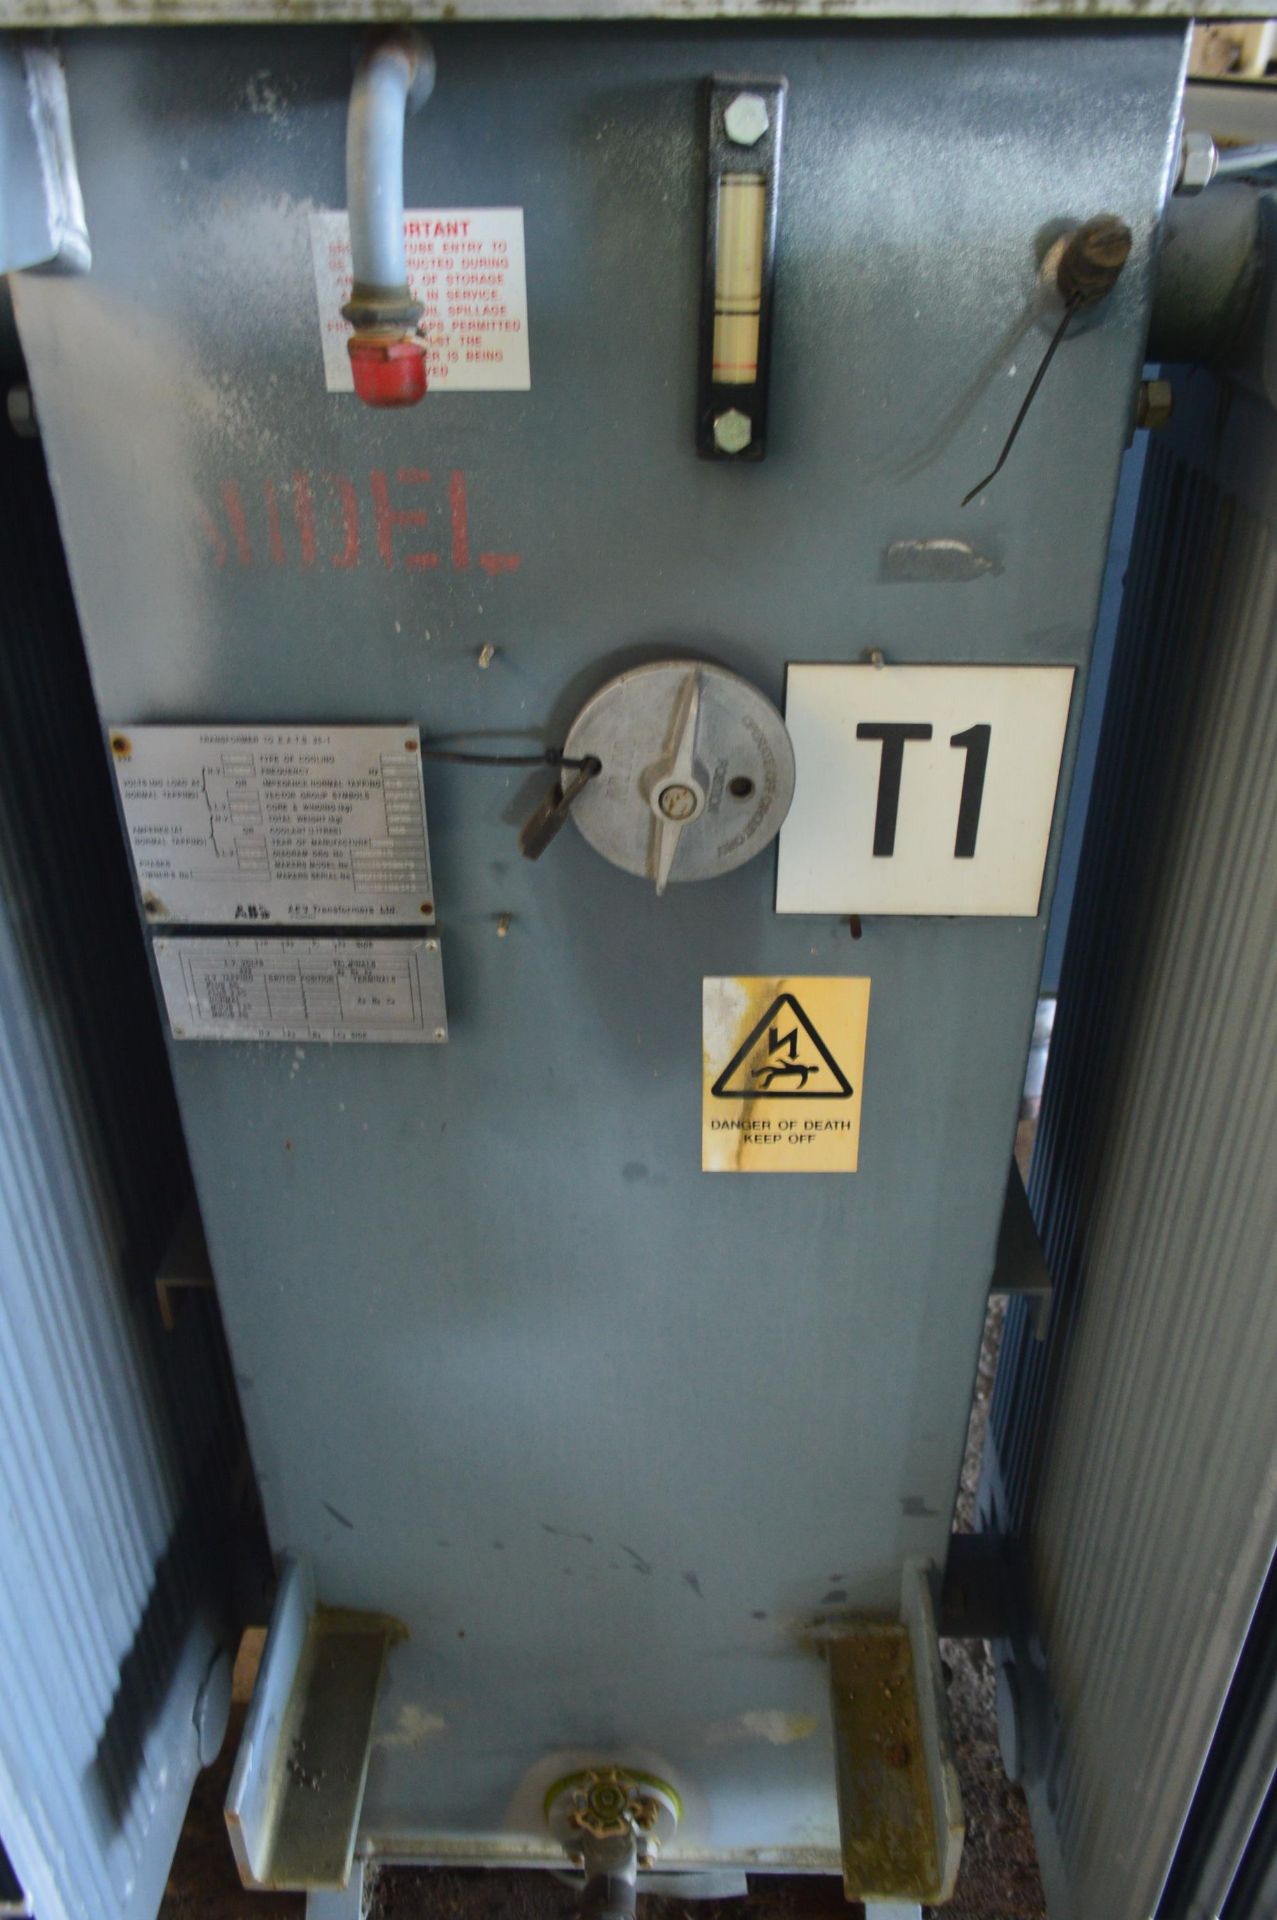 ABB 1L-IE990079 1000kVA Transformer, serial no. GM21911/3, 50hZ, 3,900kg total weight (lot located - Image 4 of 5